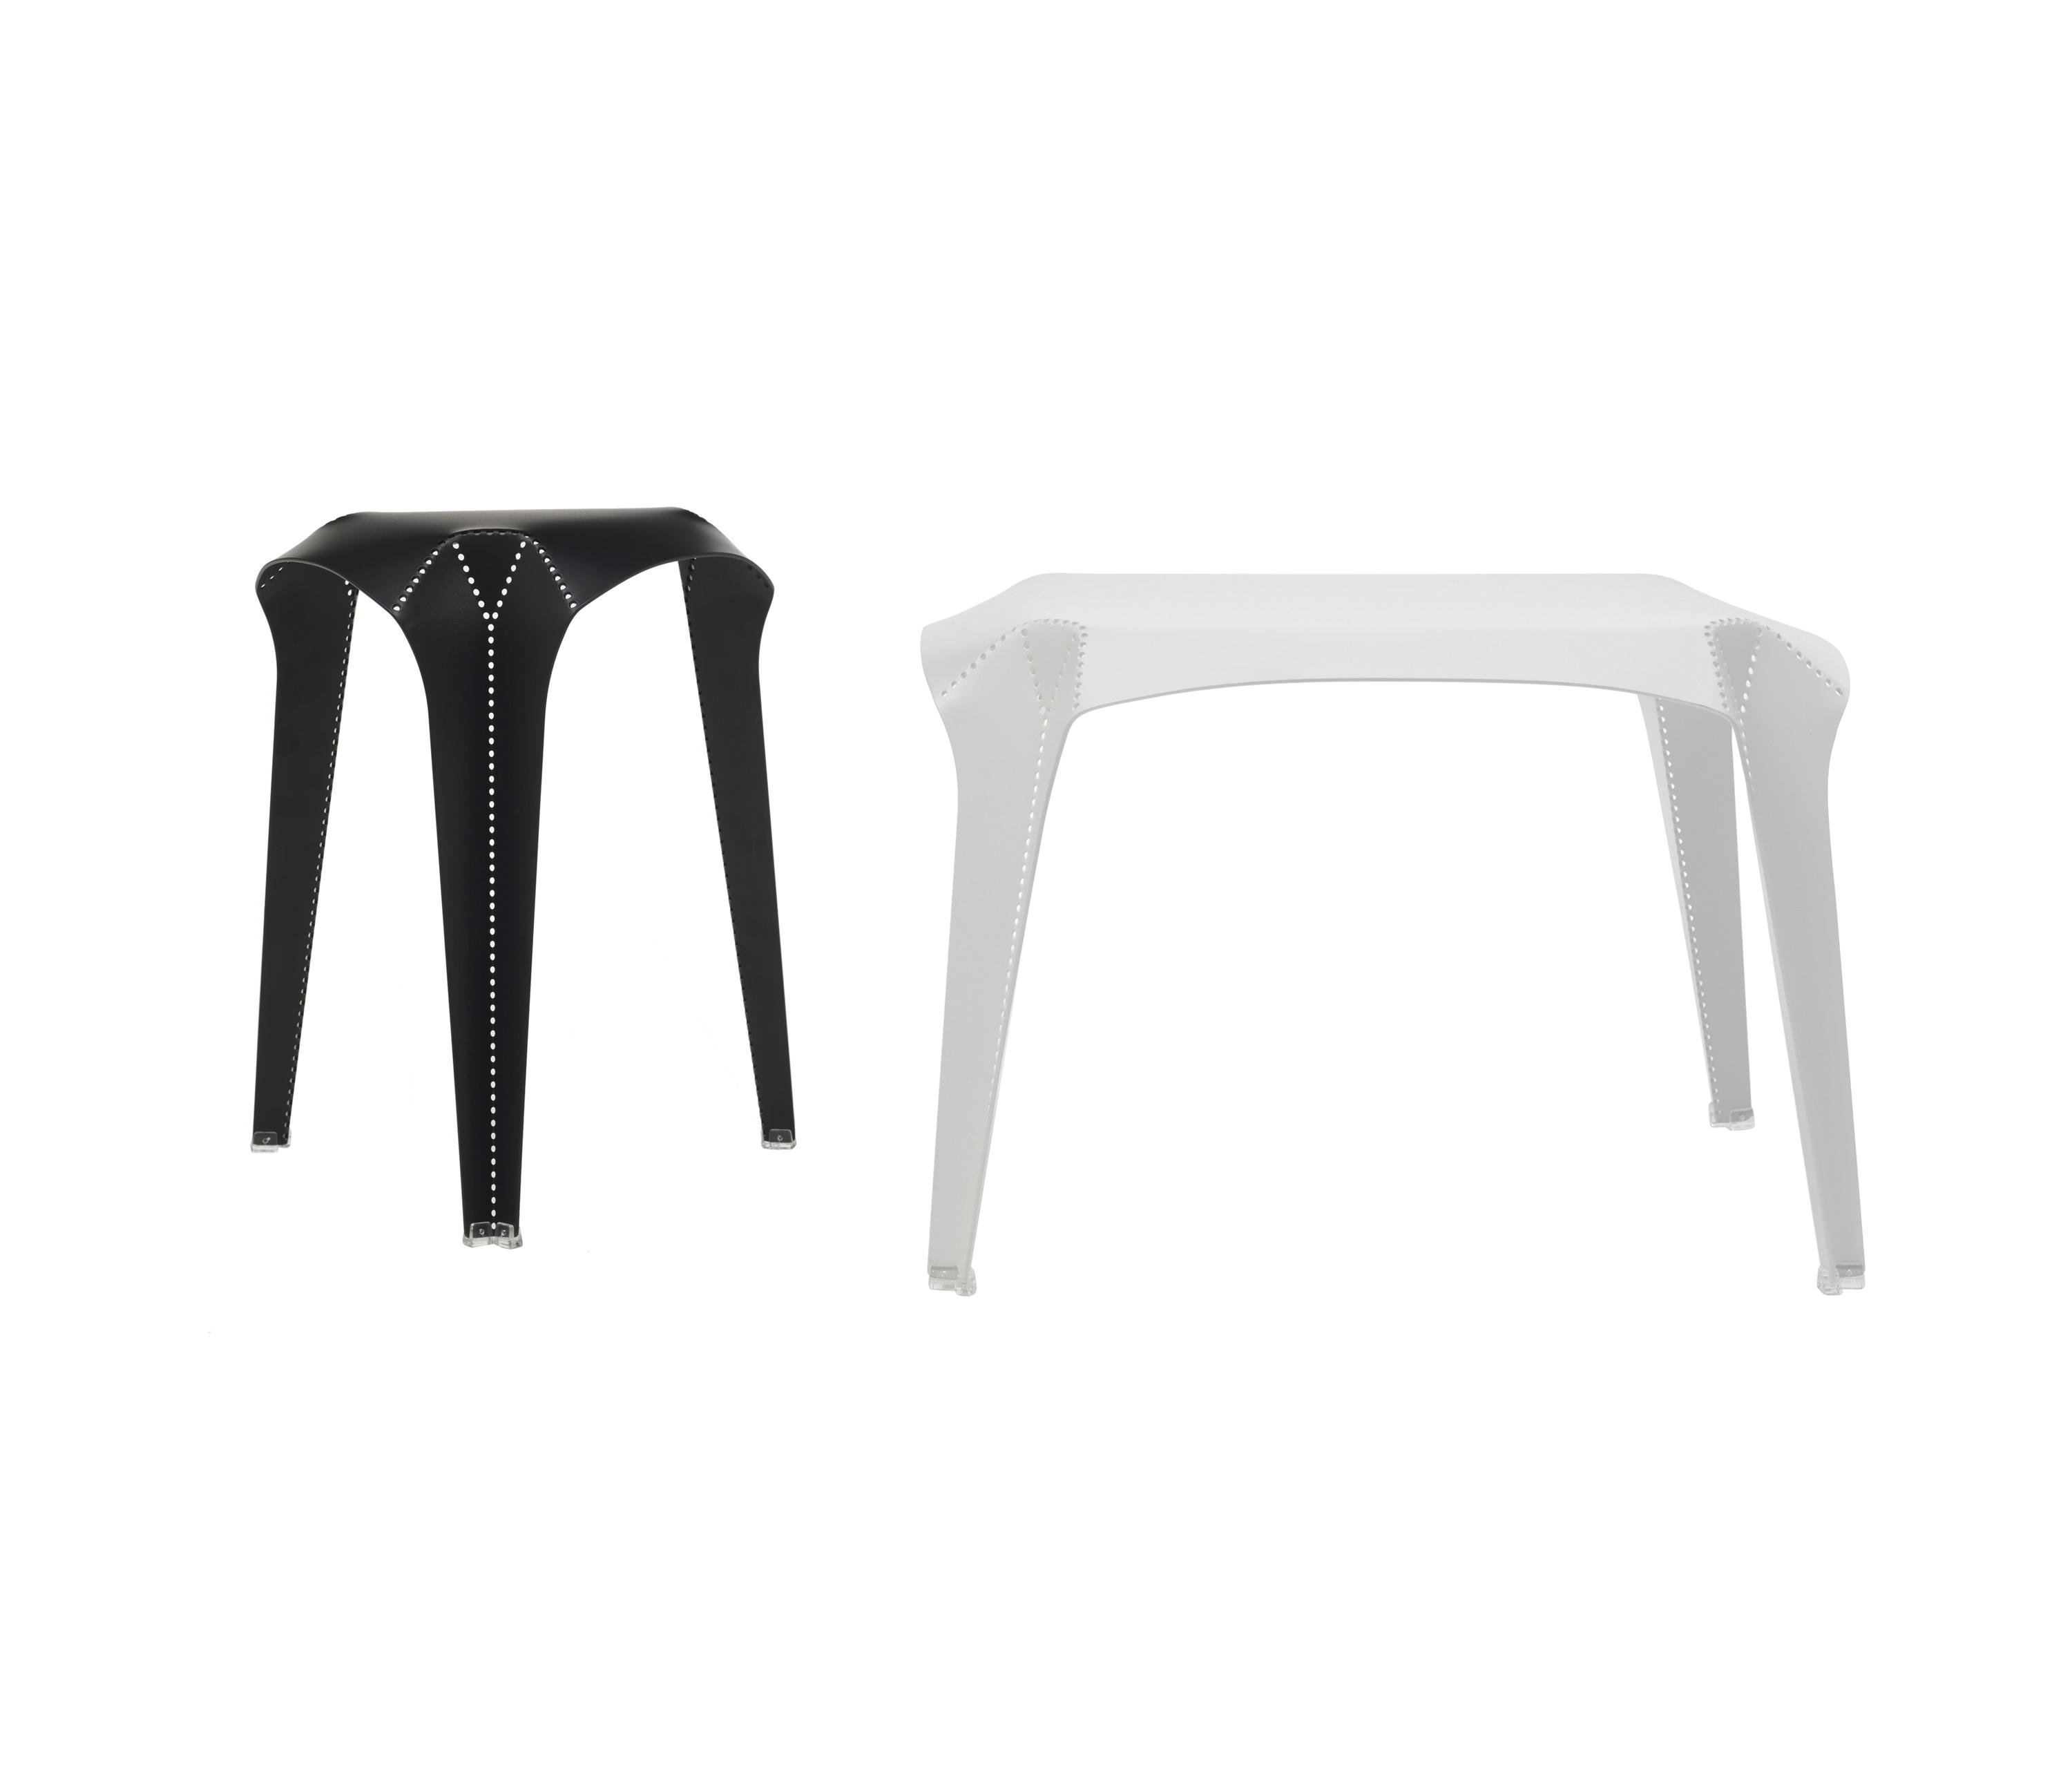 NOM Coffee Table & Stool by Bakery Design for Cappellini